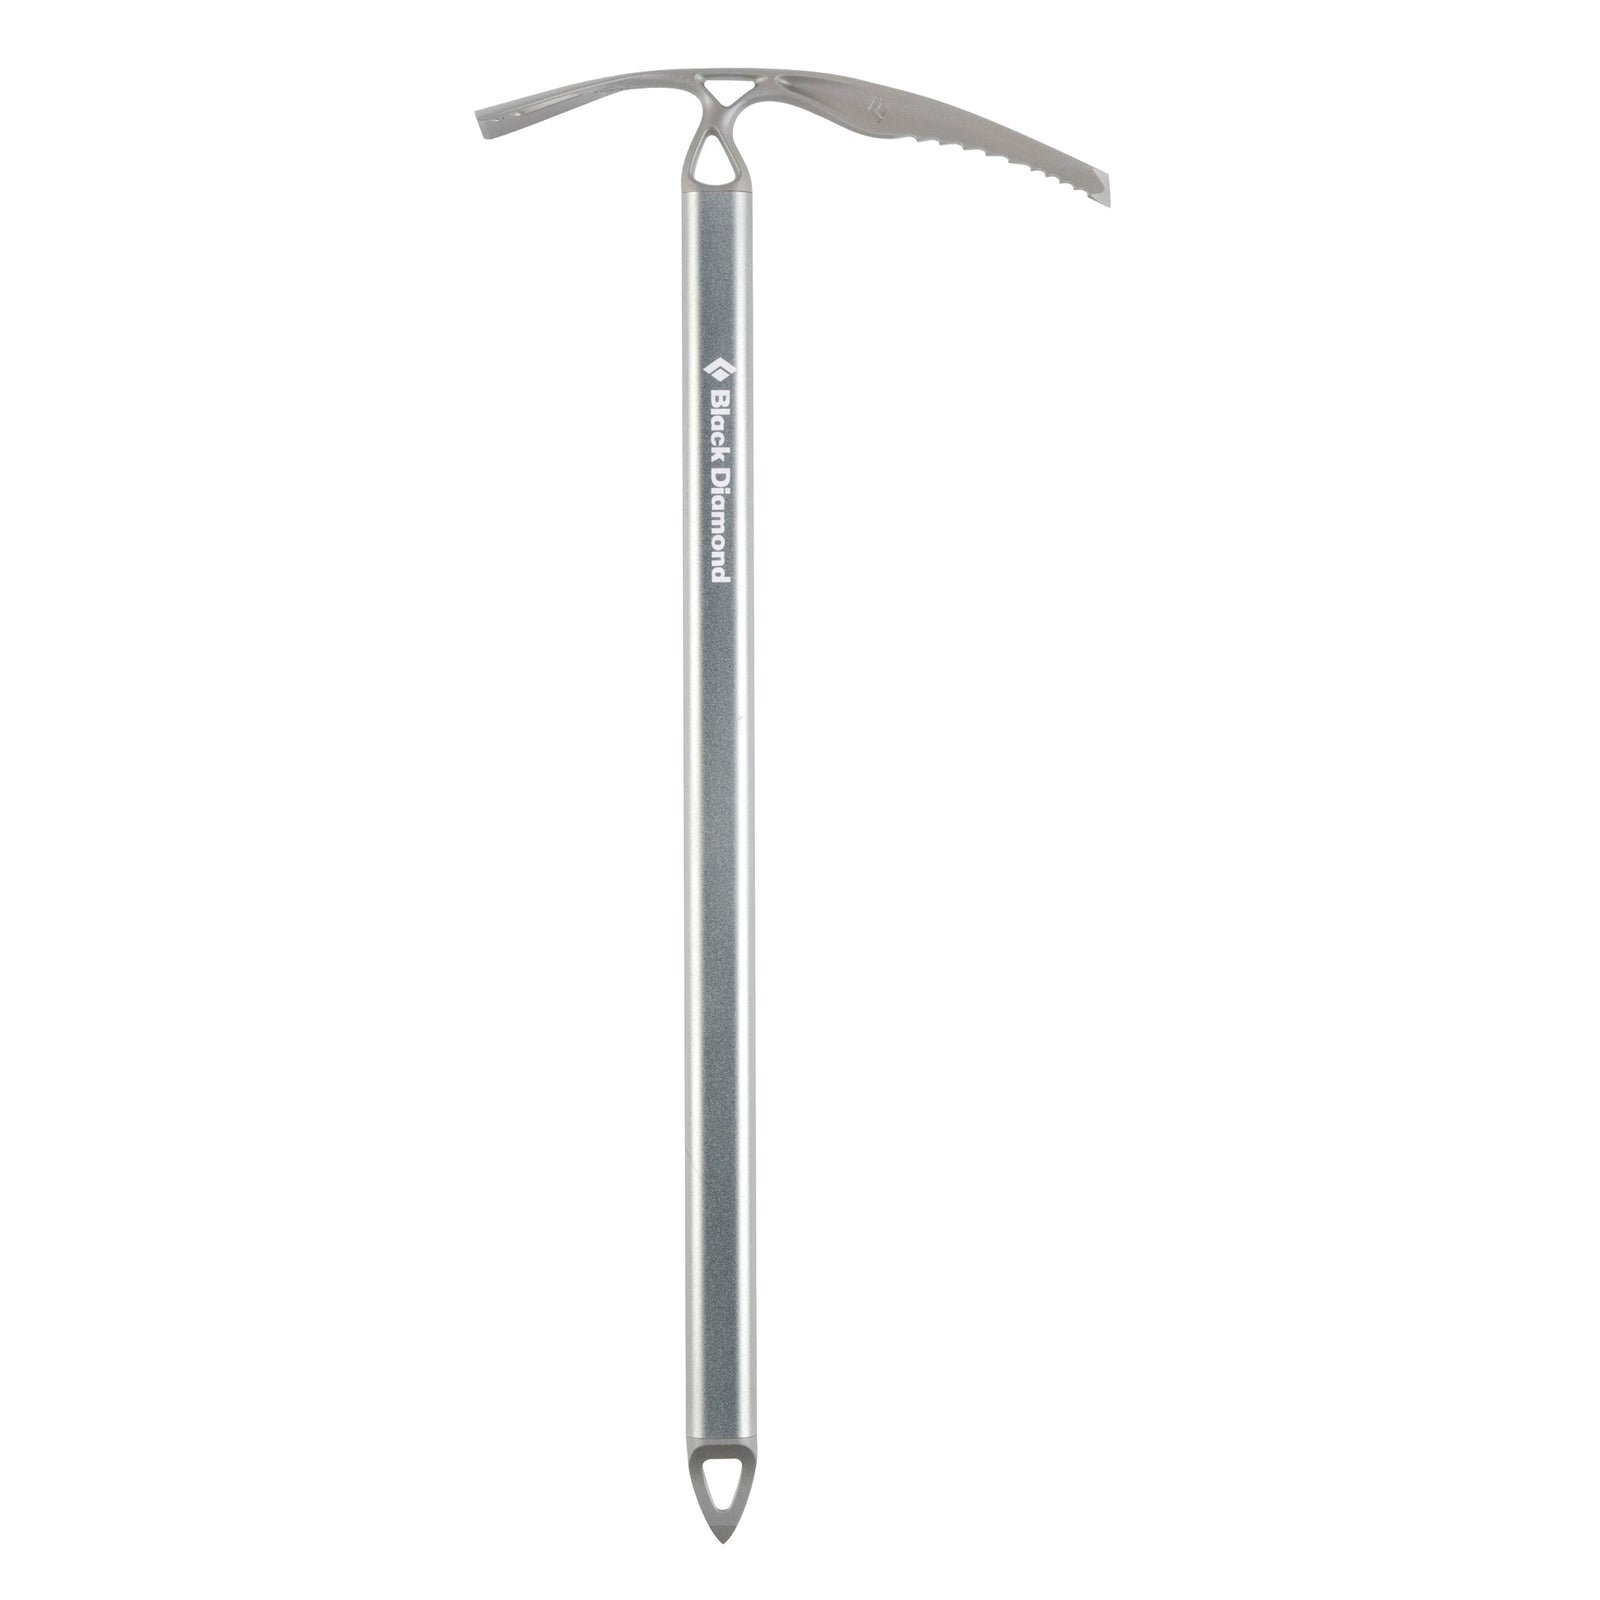 a modern take on a classic tool, the bd raven ice axe